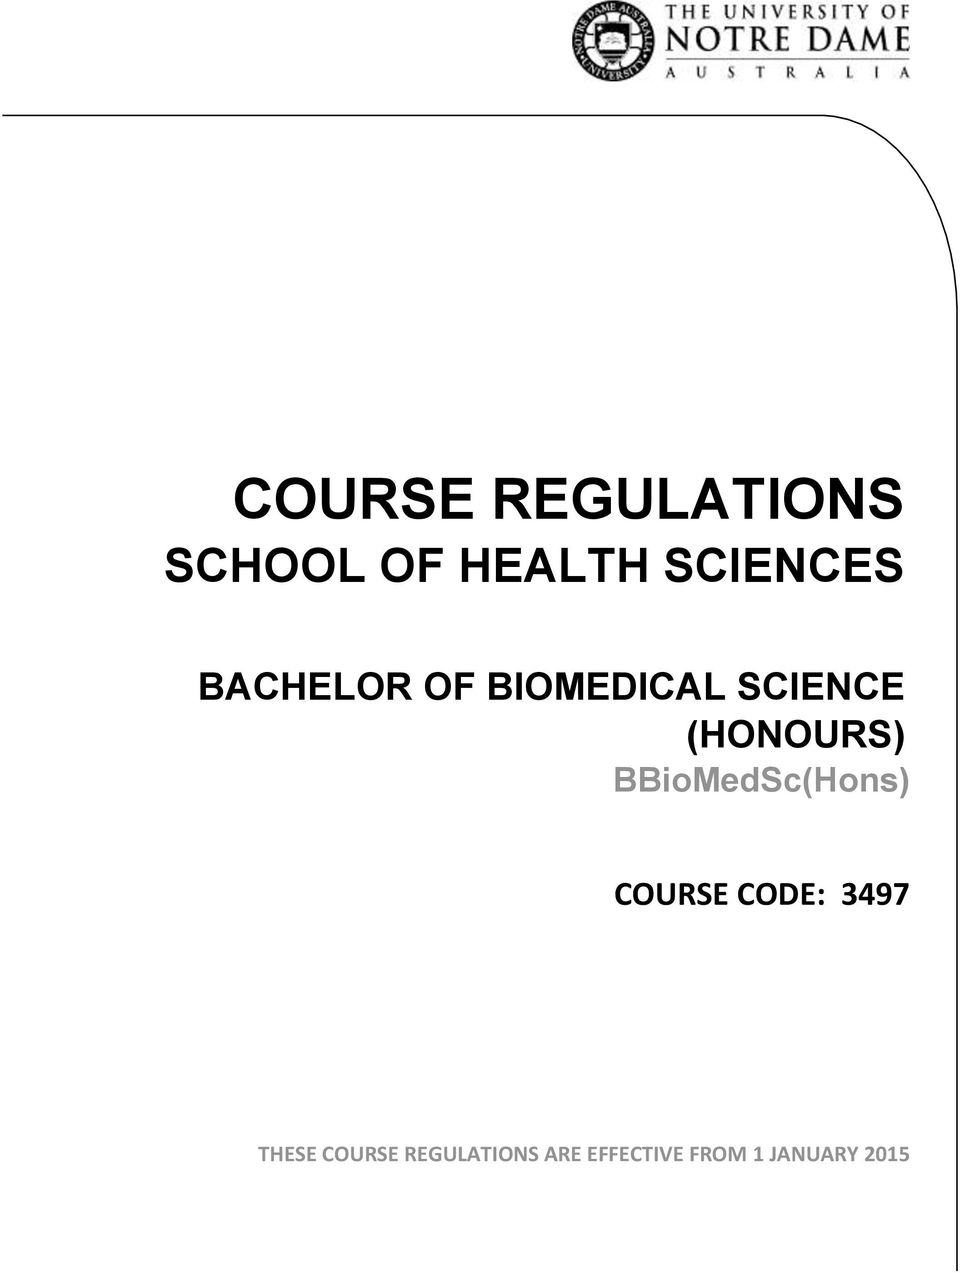 BBioMedSc(Hons) COURSE CODE: 3497 THESE